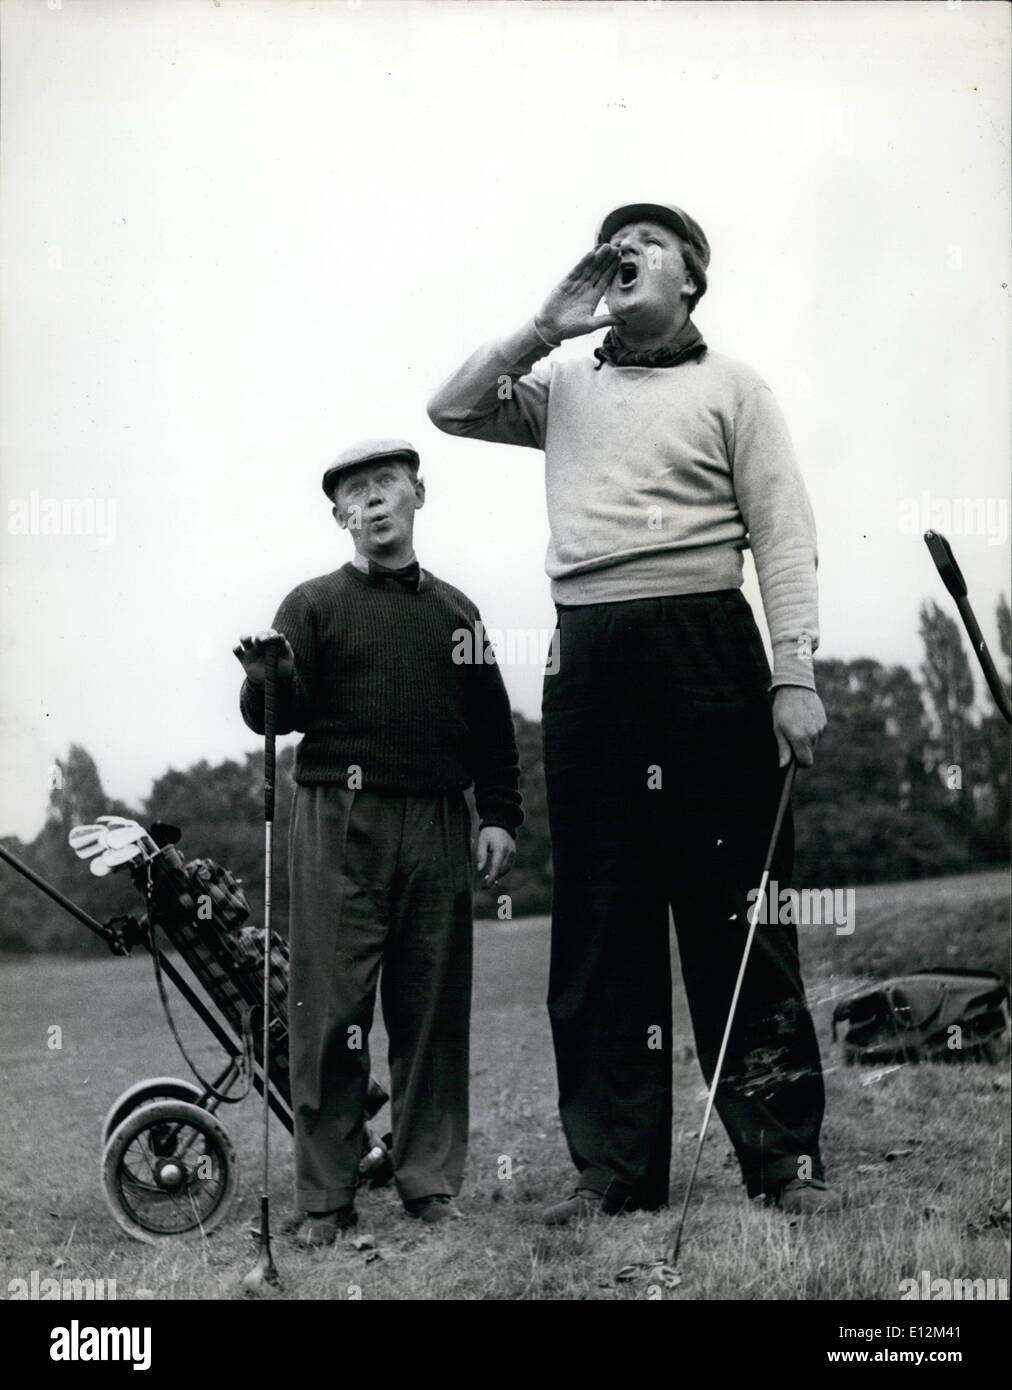 Feb. 24, 2012 - While Jack Edwards shouts ''fore'', his diminutive partner Charlie Drake thinks 'two' is good enough for him as Stock Photo